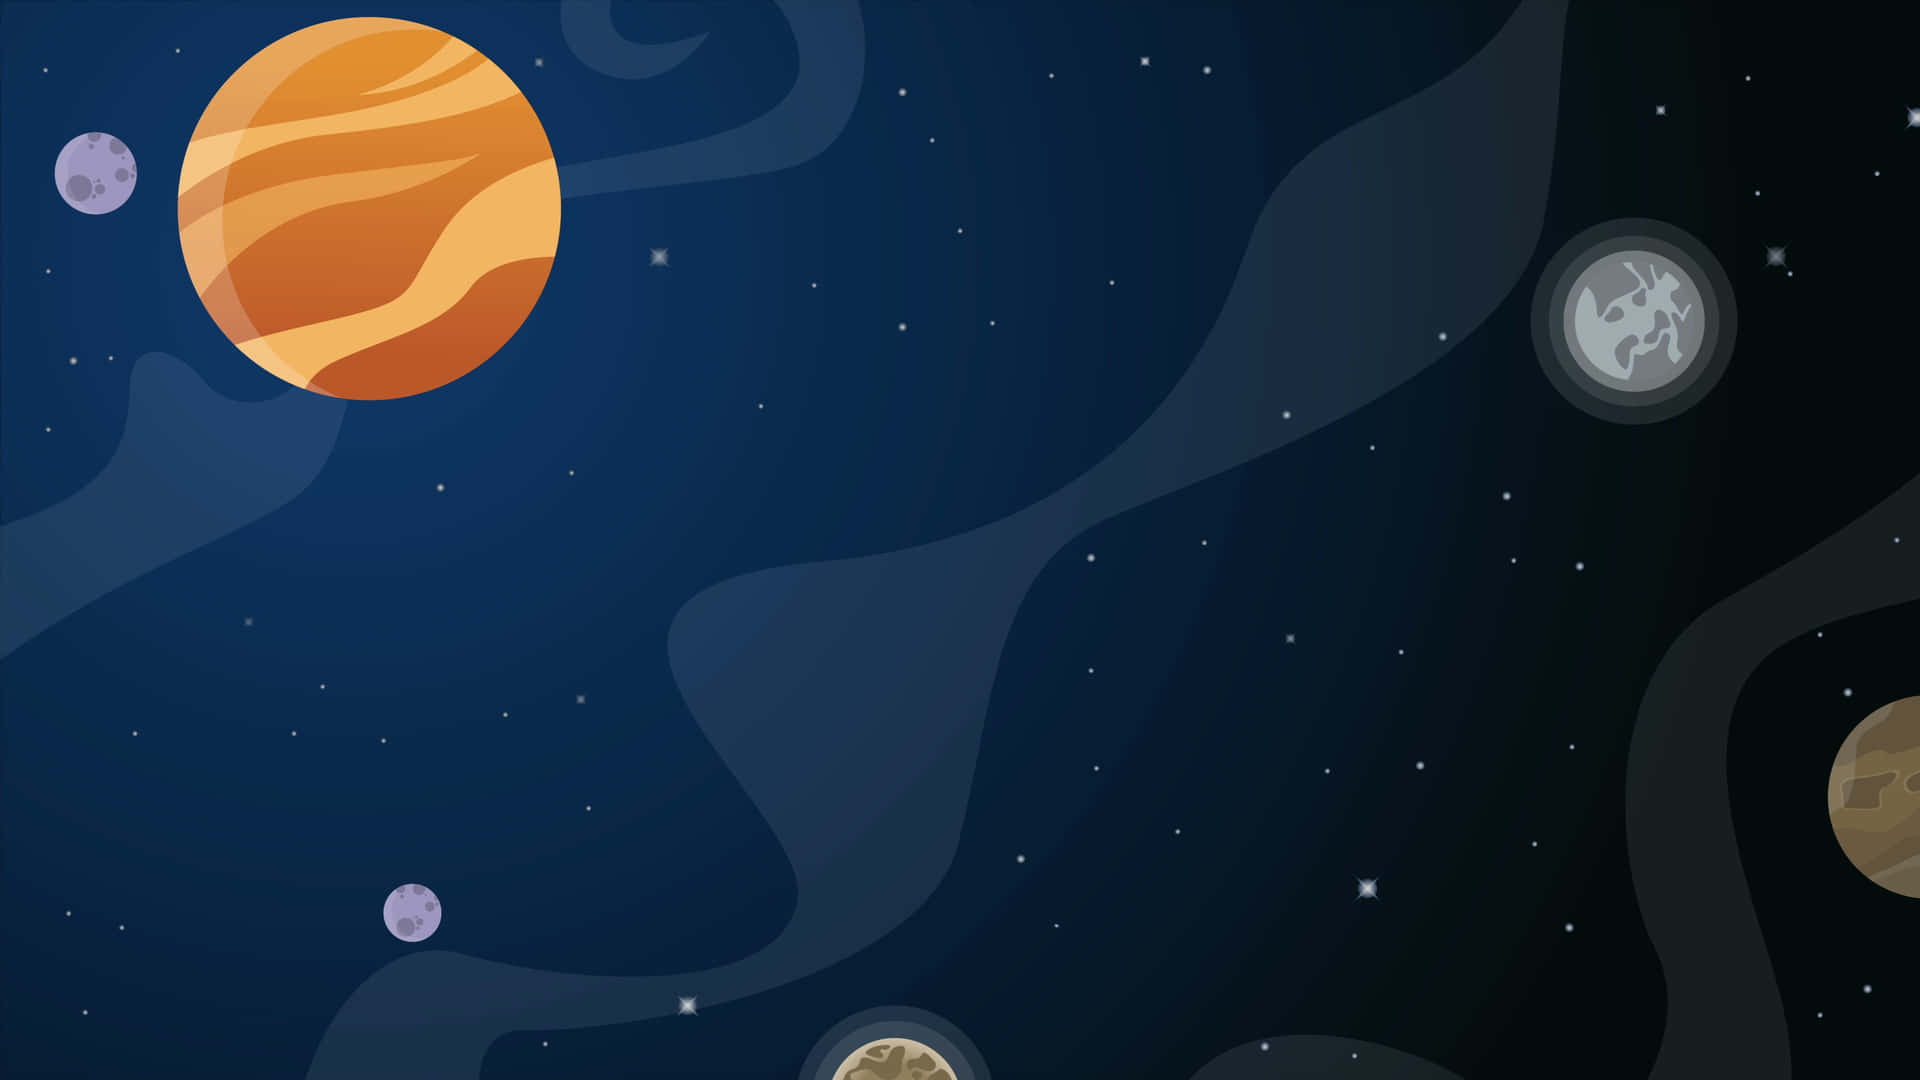 Explore the mysteries of the animated space Wallpaper